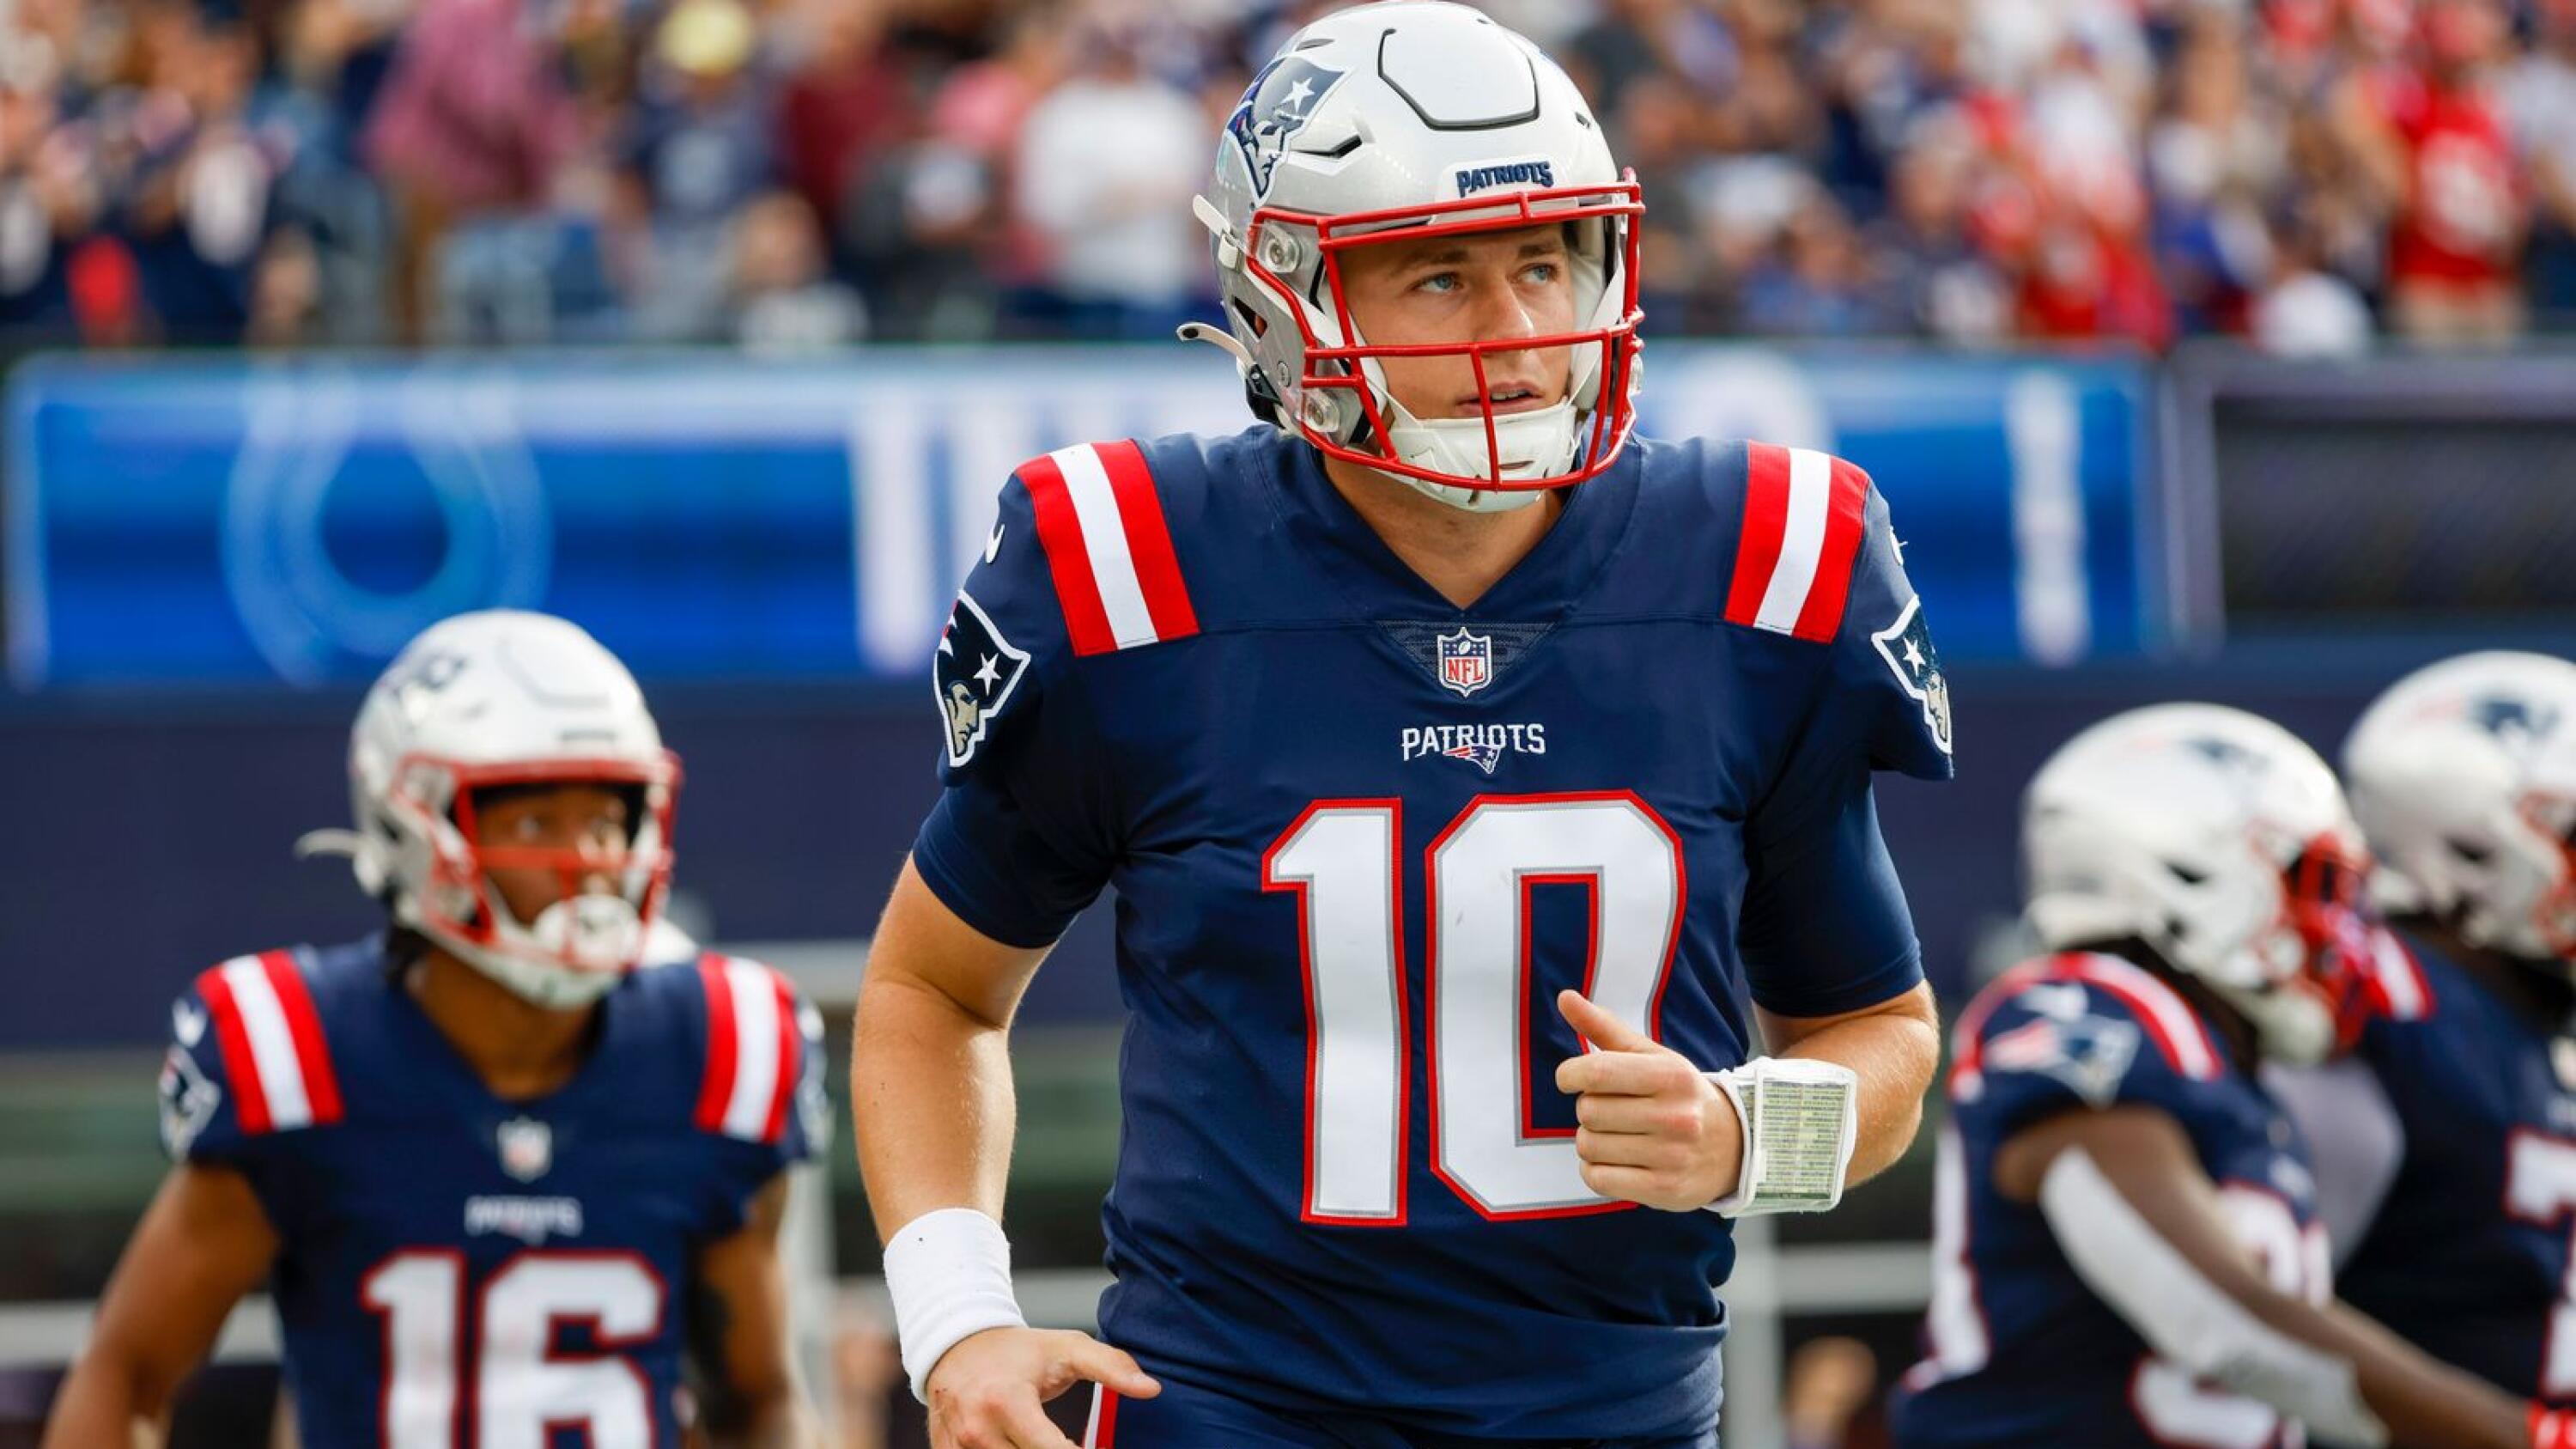 Pats QB Jones believes he can salvage rough start to Year 2